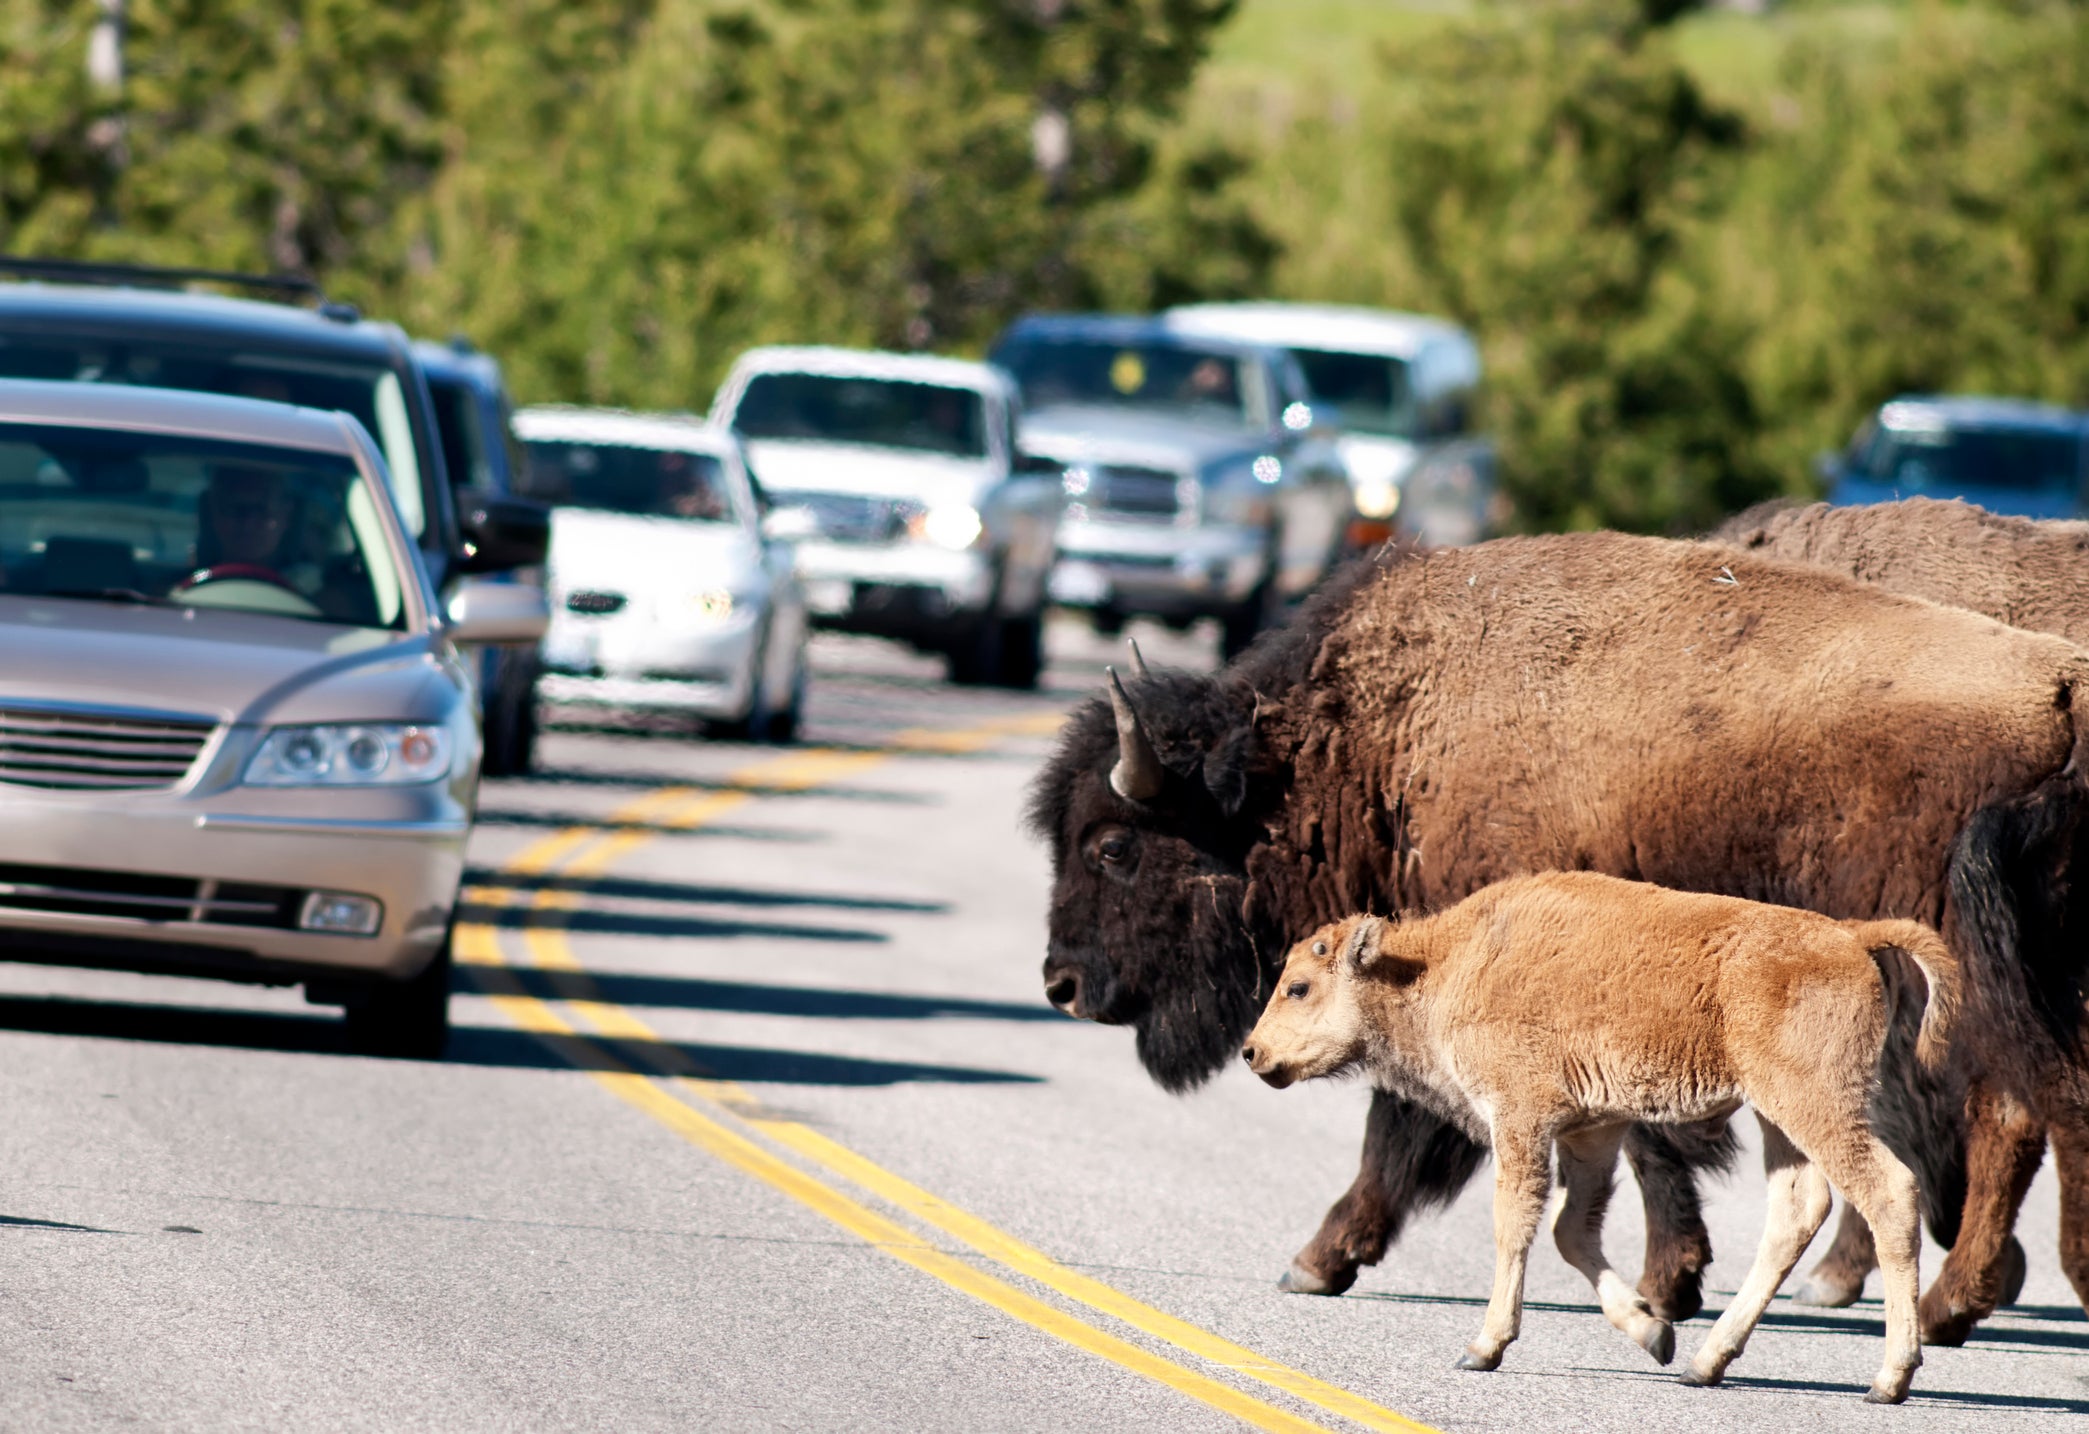 Woman gored by bison at Yellowstone after 'getting too close'